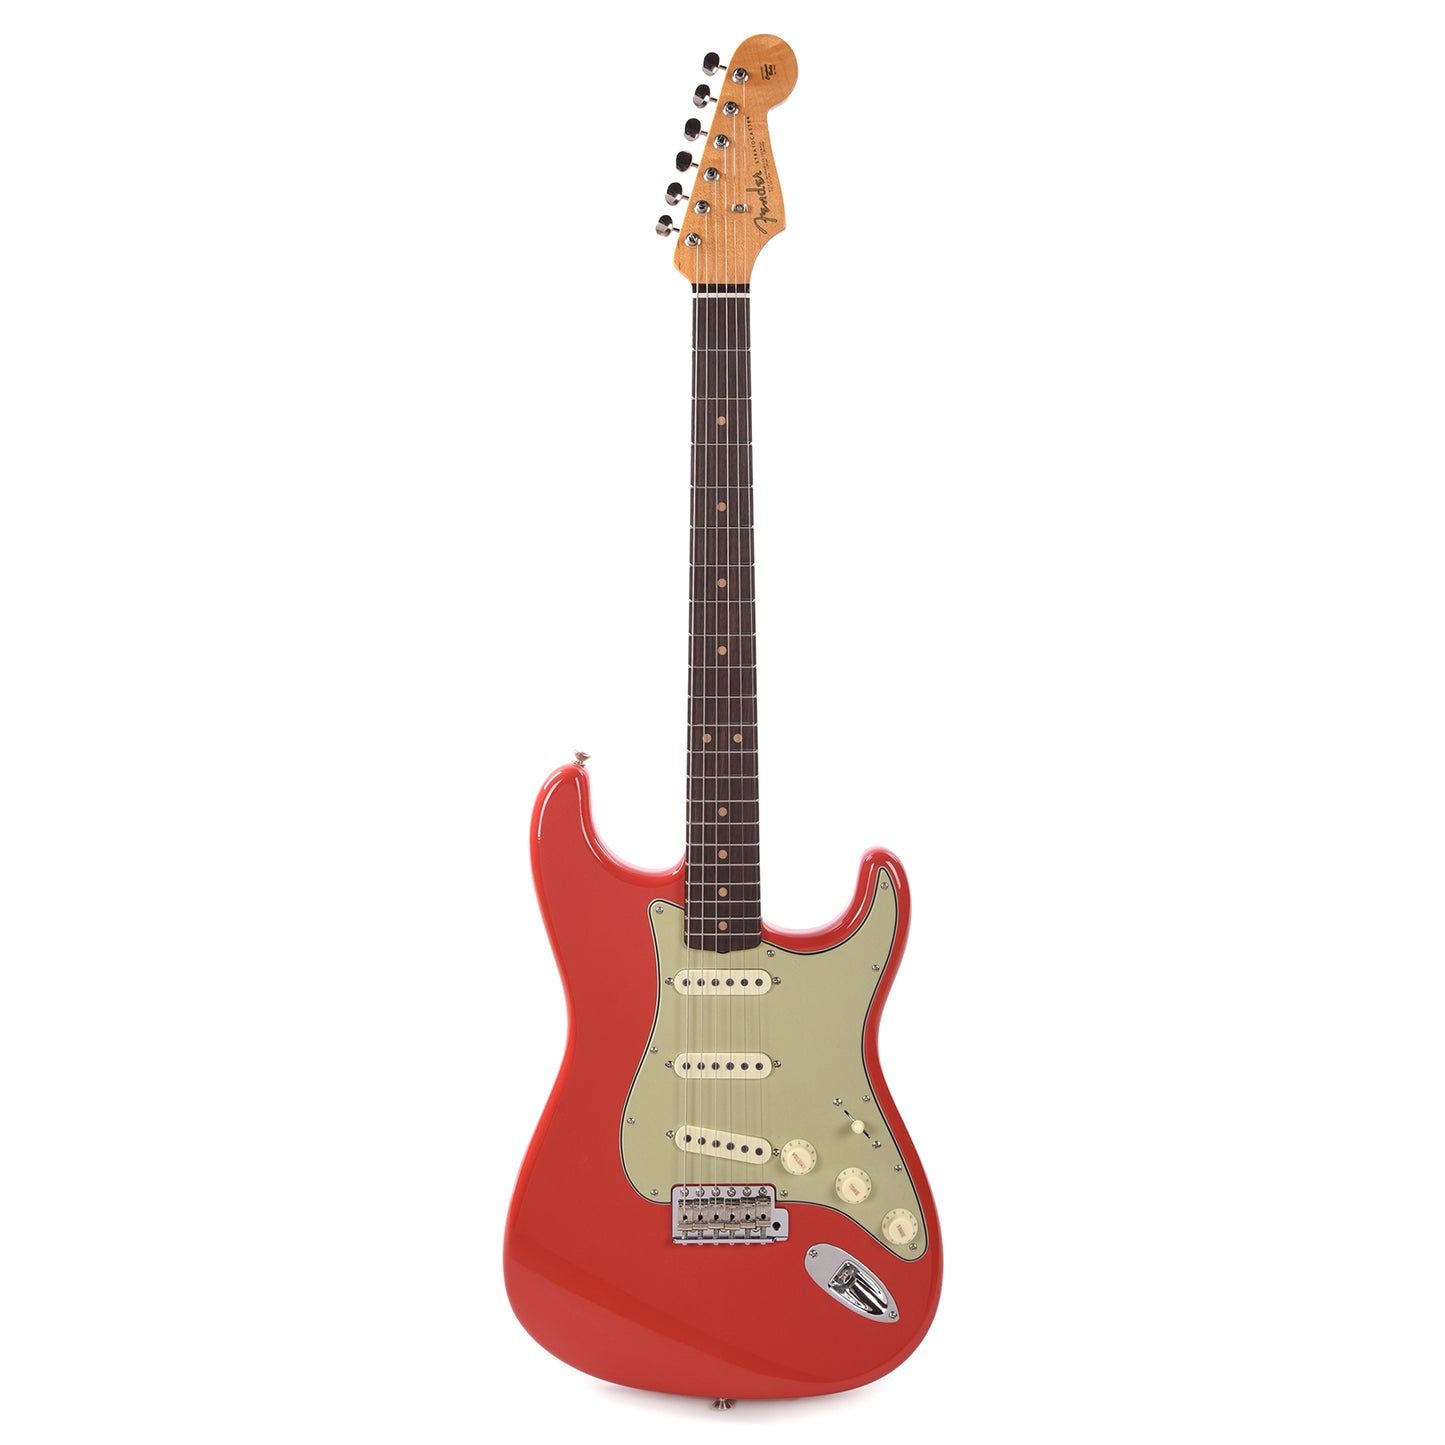 Fender Custom Shop Limited Edition 1964 L-Series Stratocaster Deluxe Closet Classic Super Aged Fiesta Red